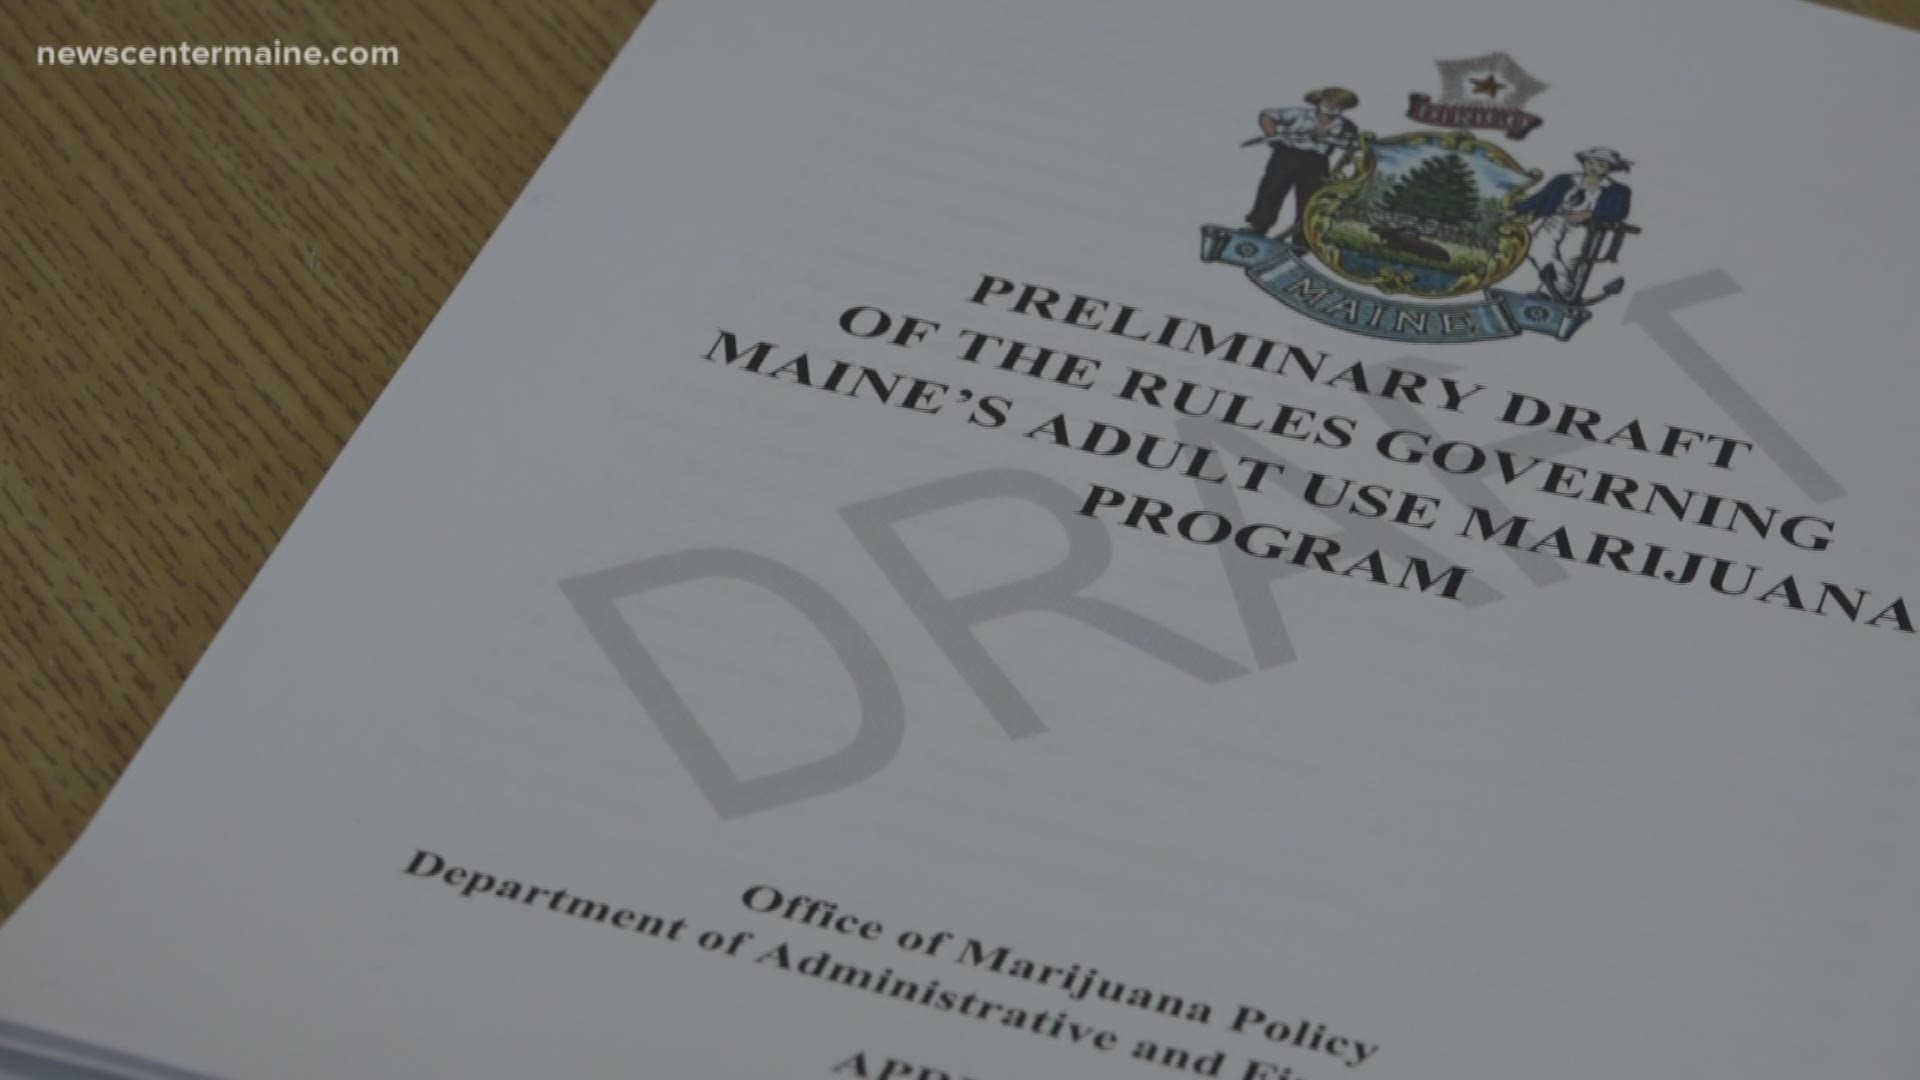 Lawmakers have been working since February to establish rules to regulate recreational marijuana use in Maine.